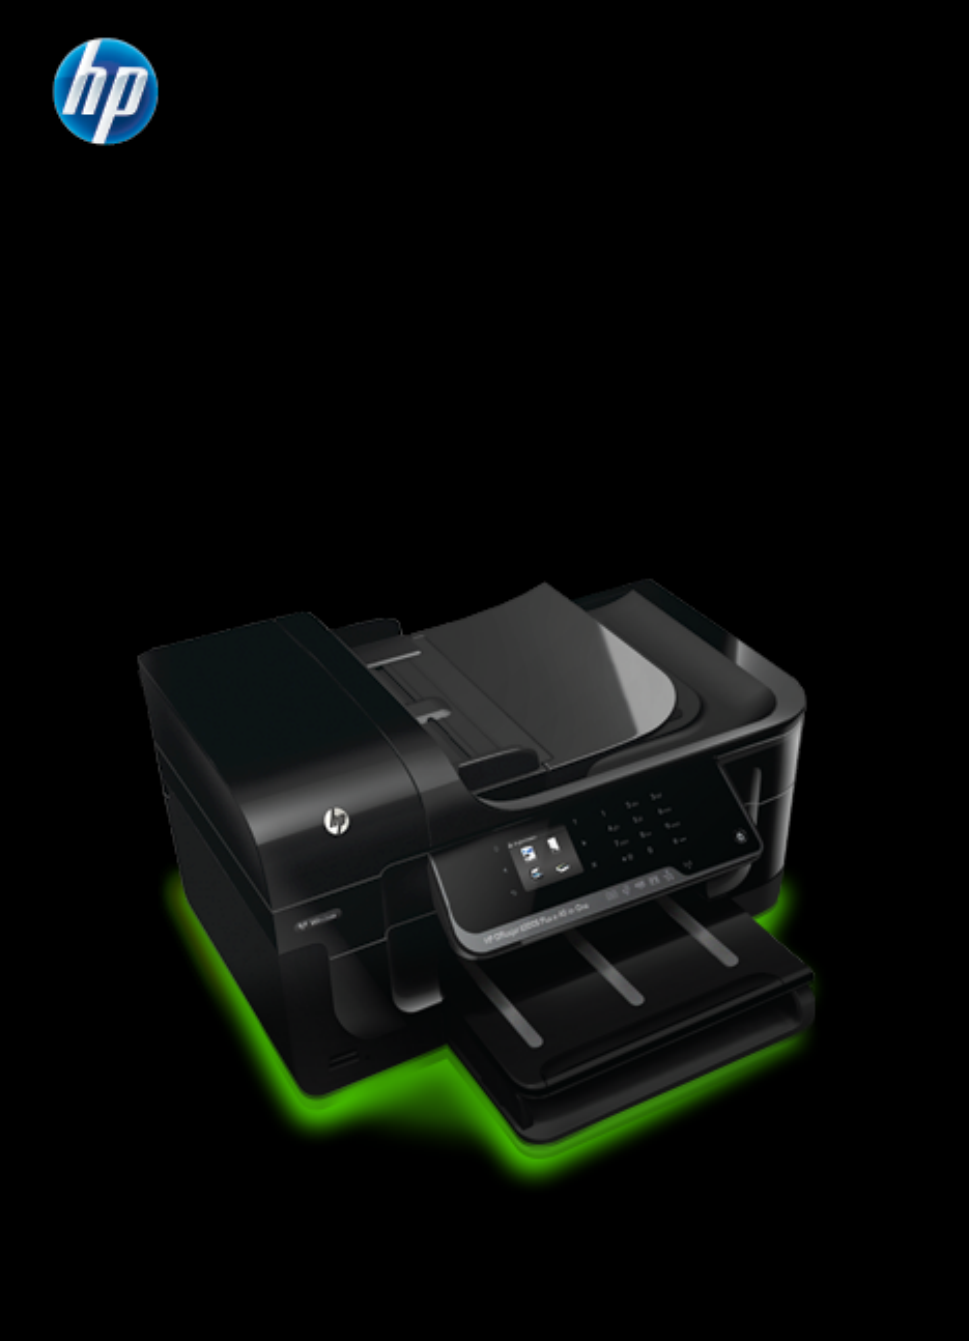 Hp officejet 7410 all-in-one driver